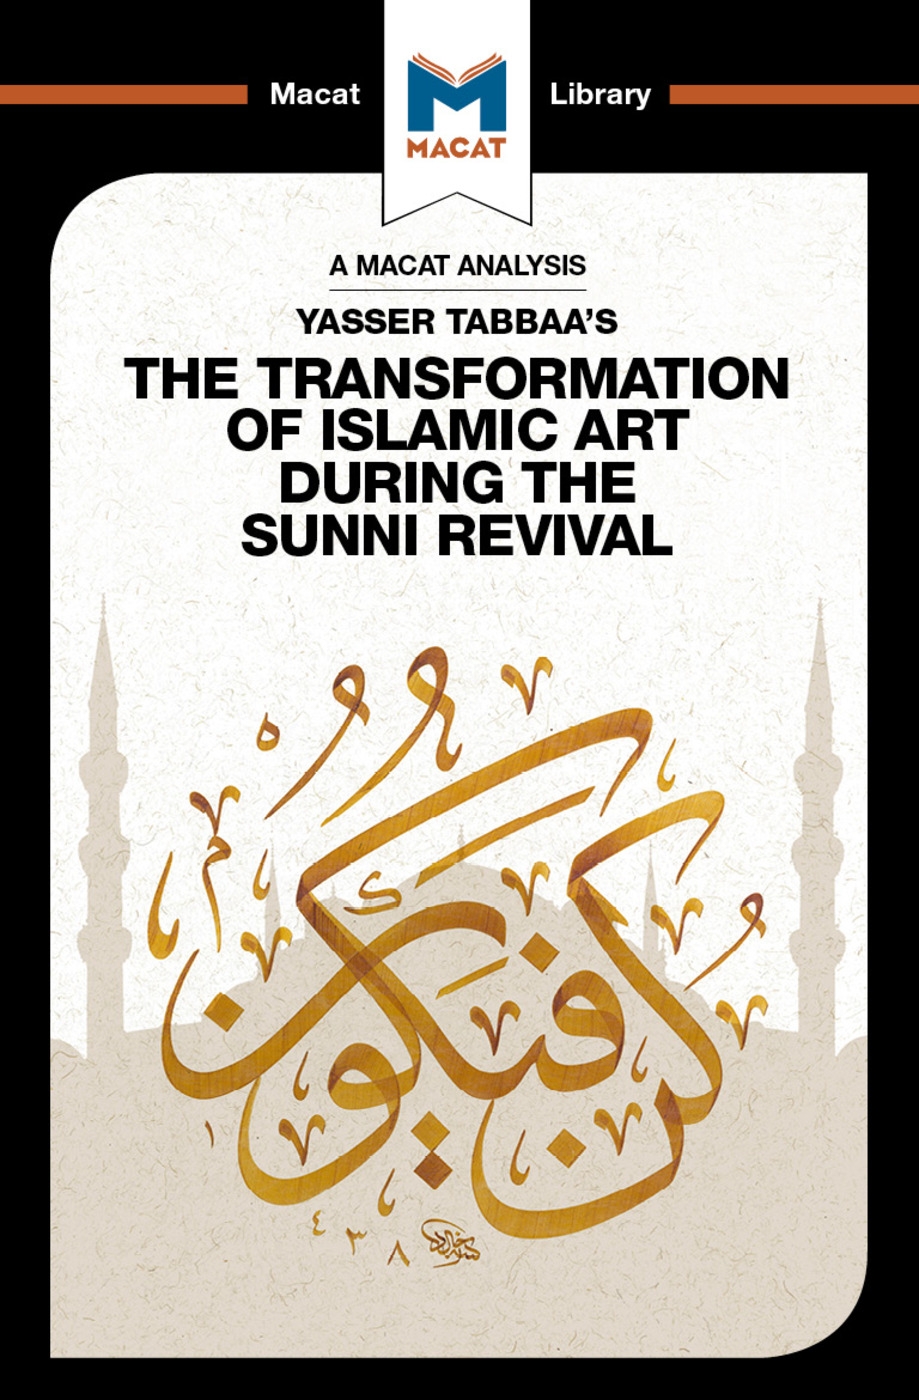 An Analysis of Yasser Tabbaa’s the Transformation of Islamic Art During the Sunni Revival